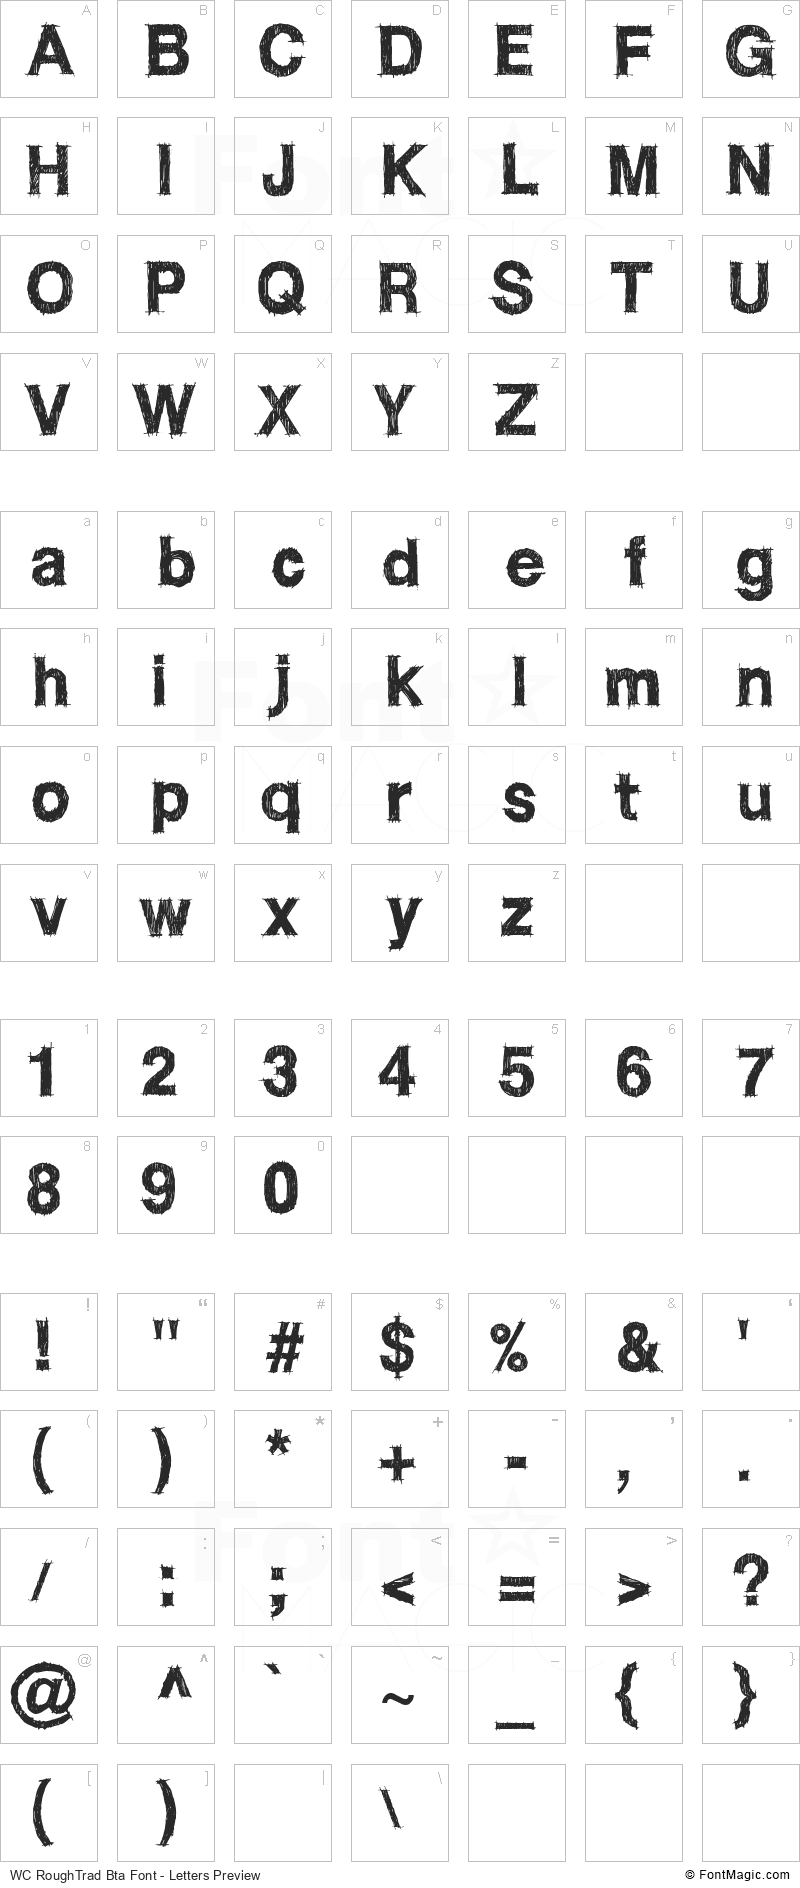 WC RoughTrad Bta Font - All Latters Preview Chart